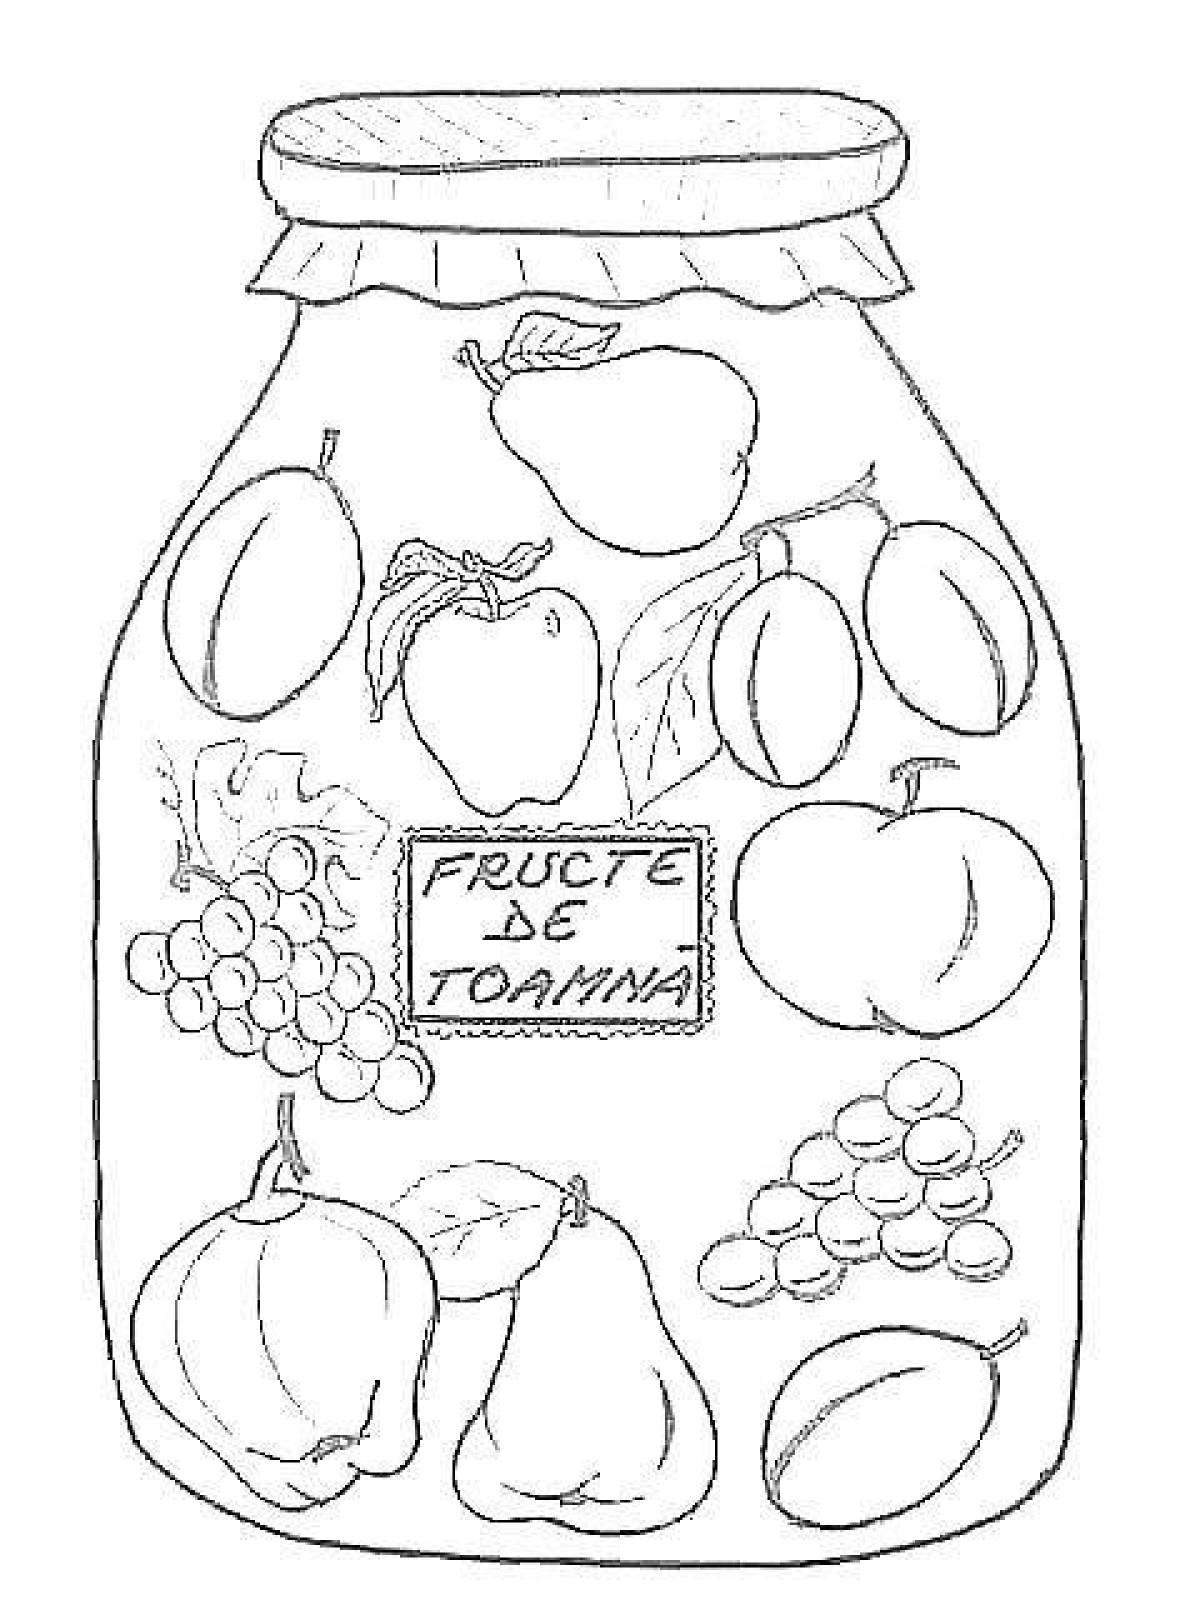 Awesome jar coloring book for kids